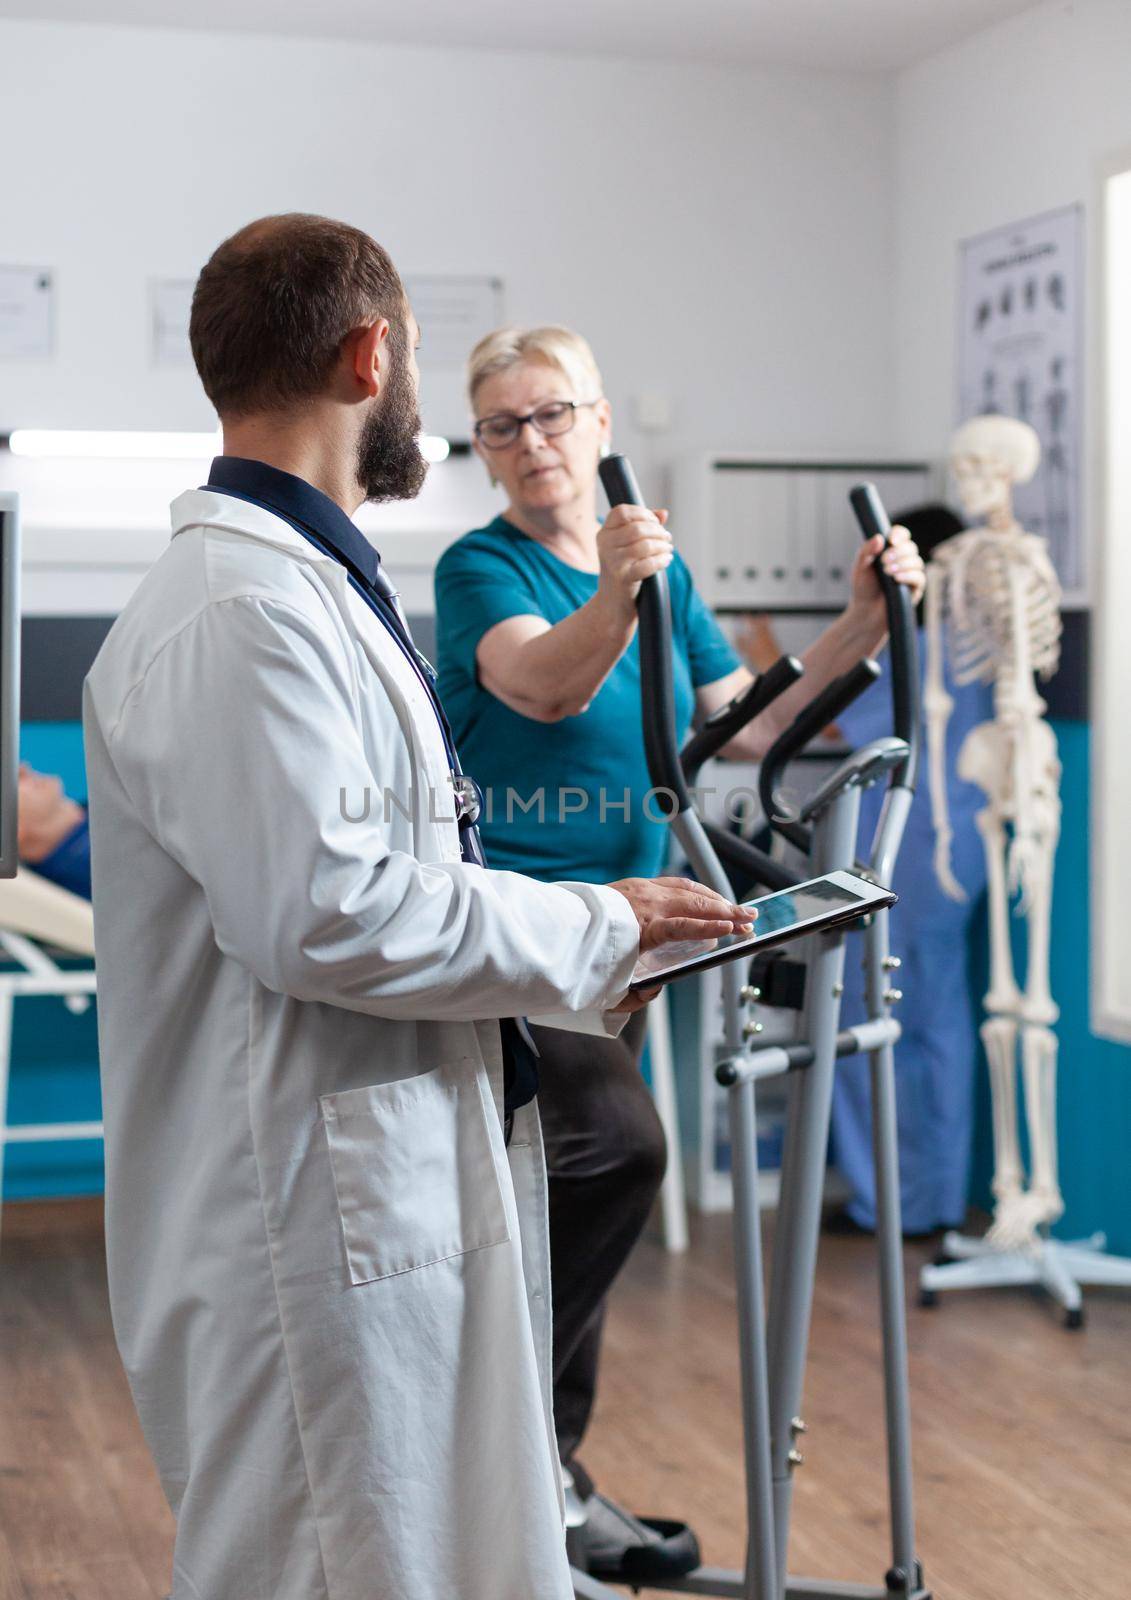 Doctor holding digital tablet for checkup with woman at recovery. Senior patient using electrical bicycle for physical exercise and activity while talking to medic about physiotherapy